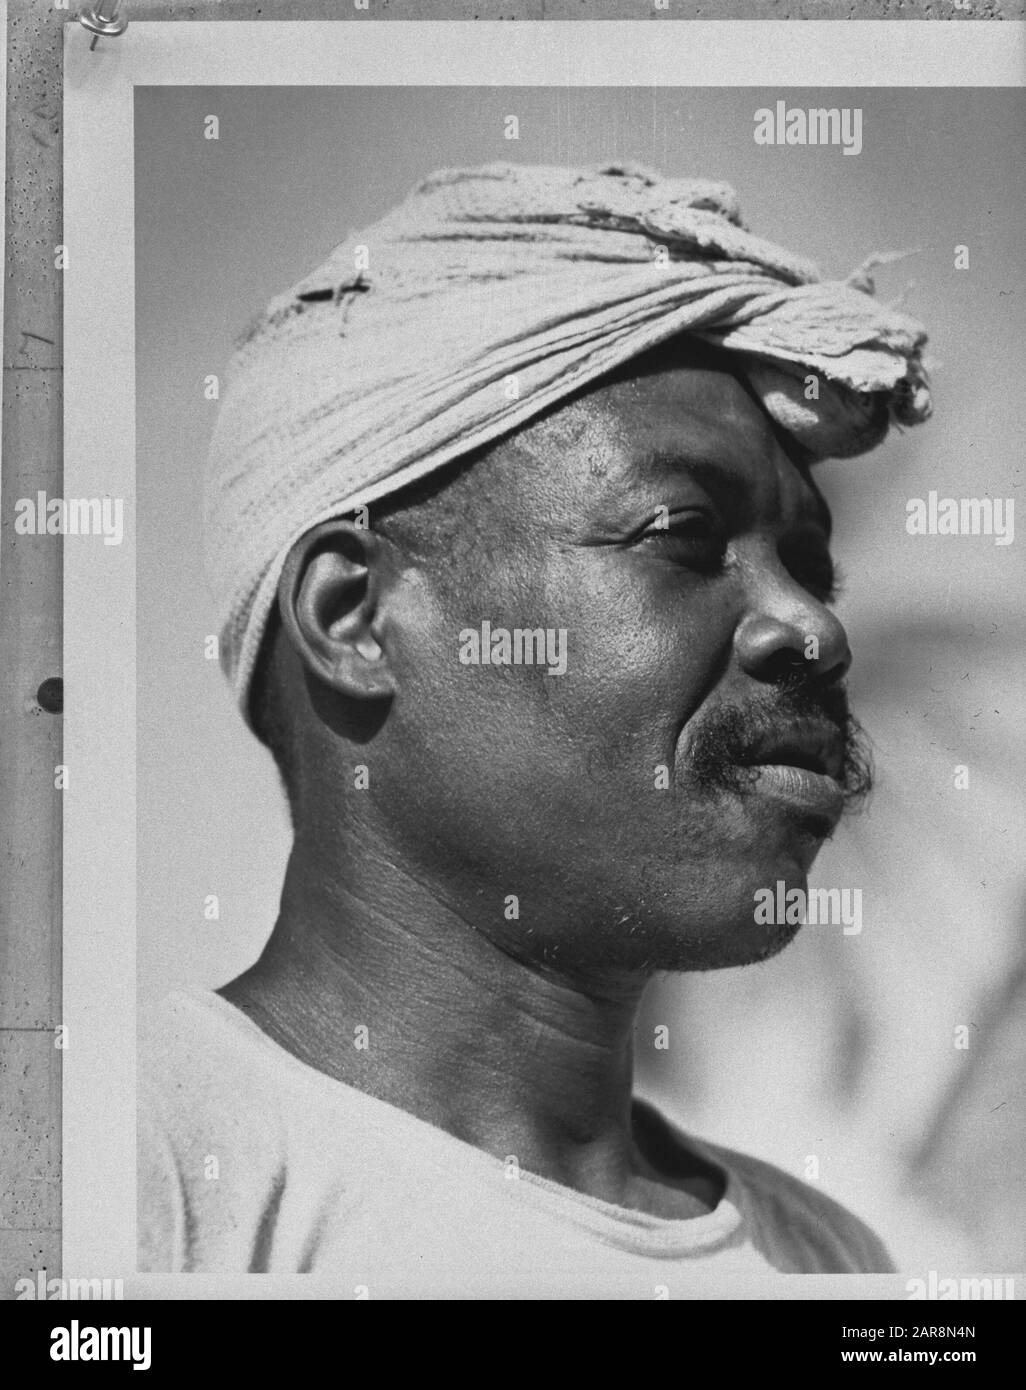 Wi [West Indies]/Anefo London series  Surinamer Date: {1940-1945} Location: Suriname Keywords: population, natives, World War II Stock Photo